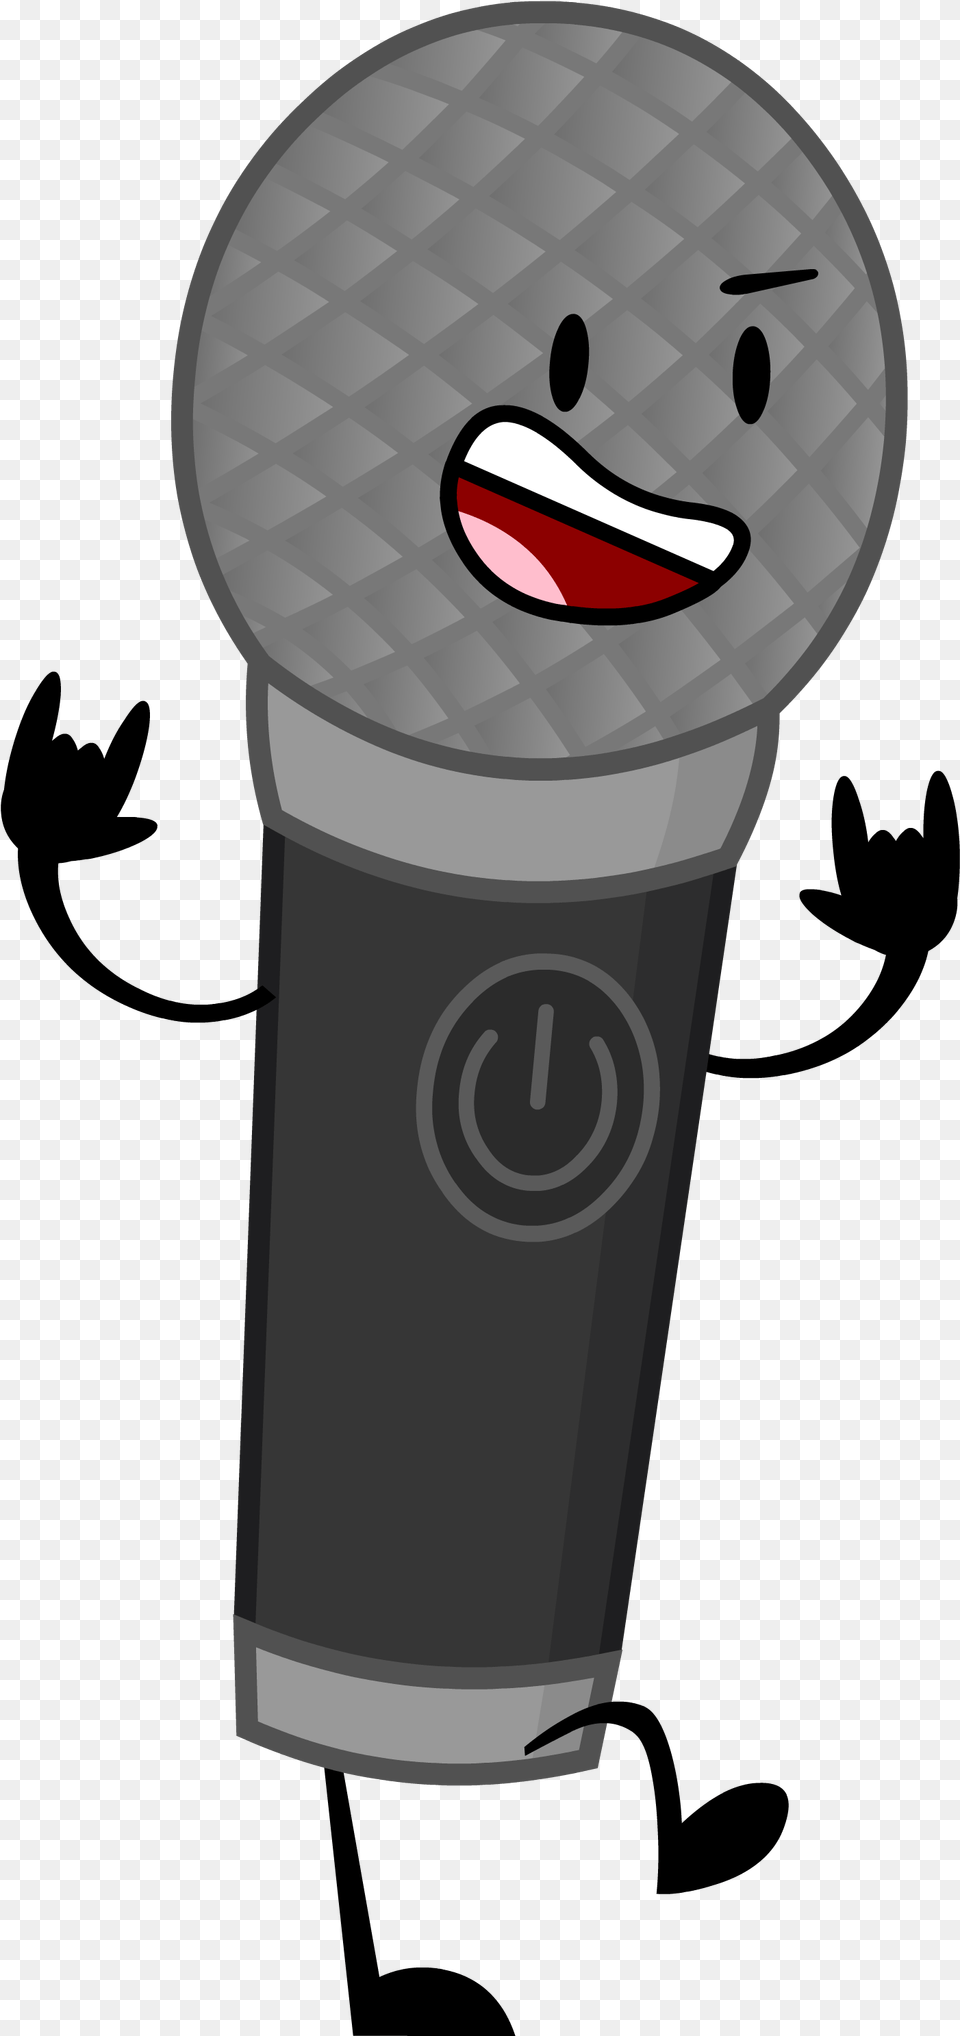 Microphone Inanimate Insanity Wiki Fandom Inanimate Insanity Microphone, Electrical Device, Bottle, Shaker, Light Free Transparent Png